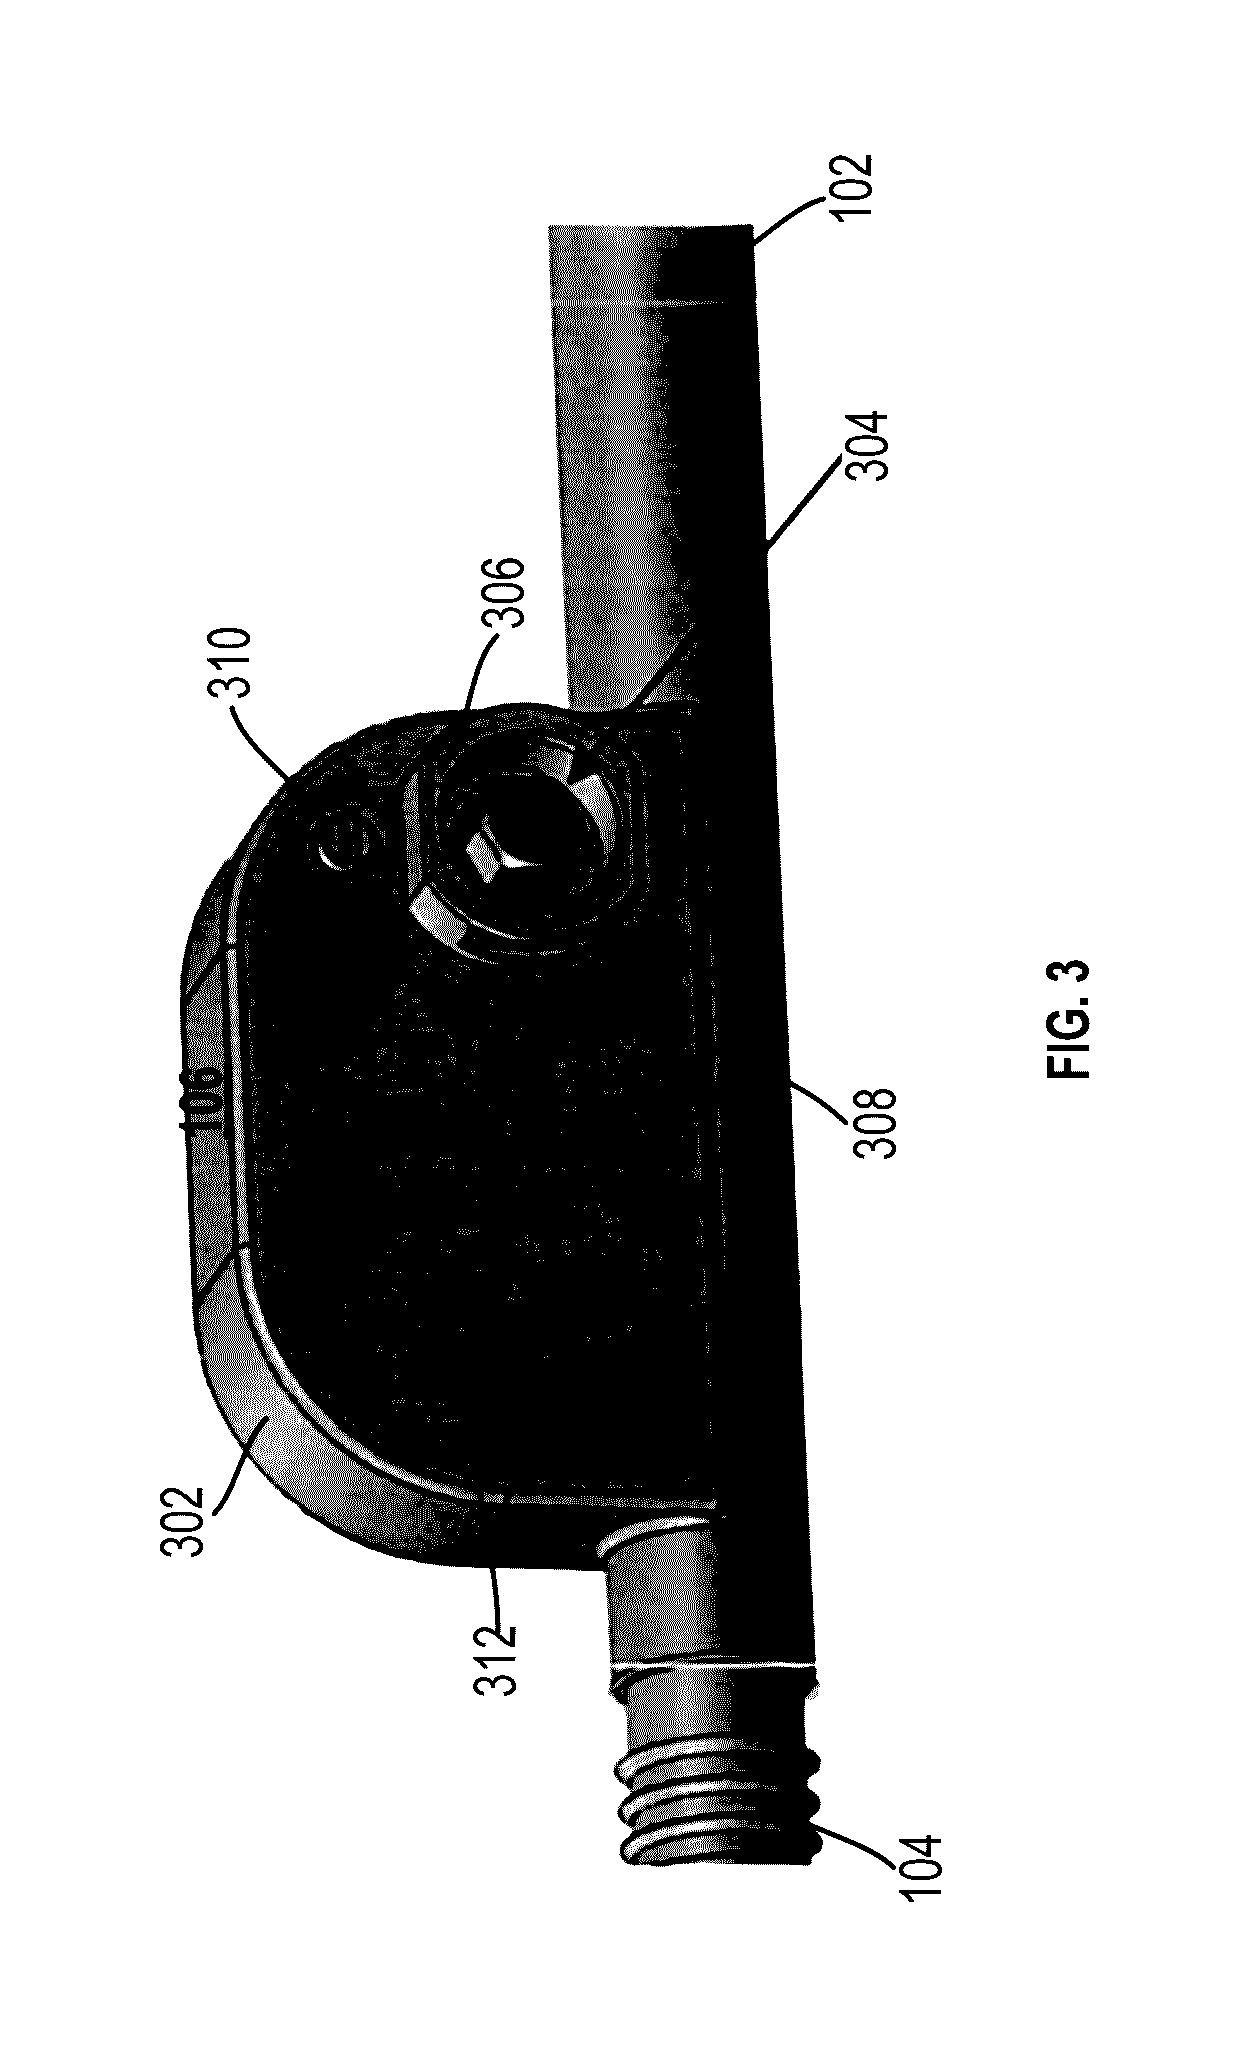 Growing rod for treating spinal deformities and method for using same